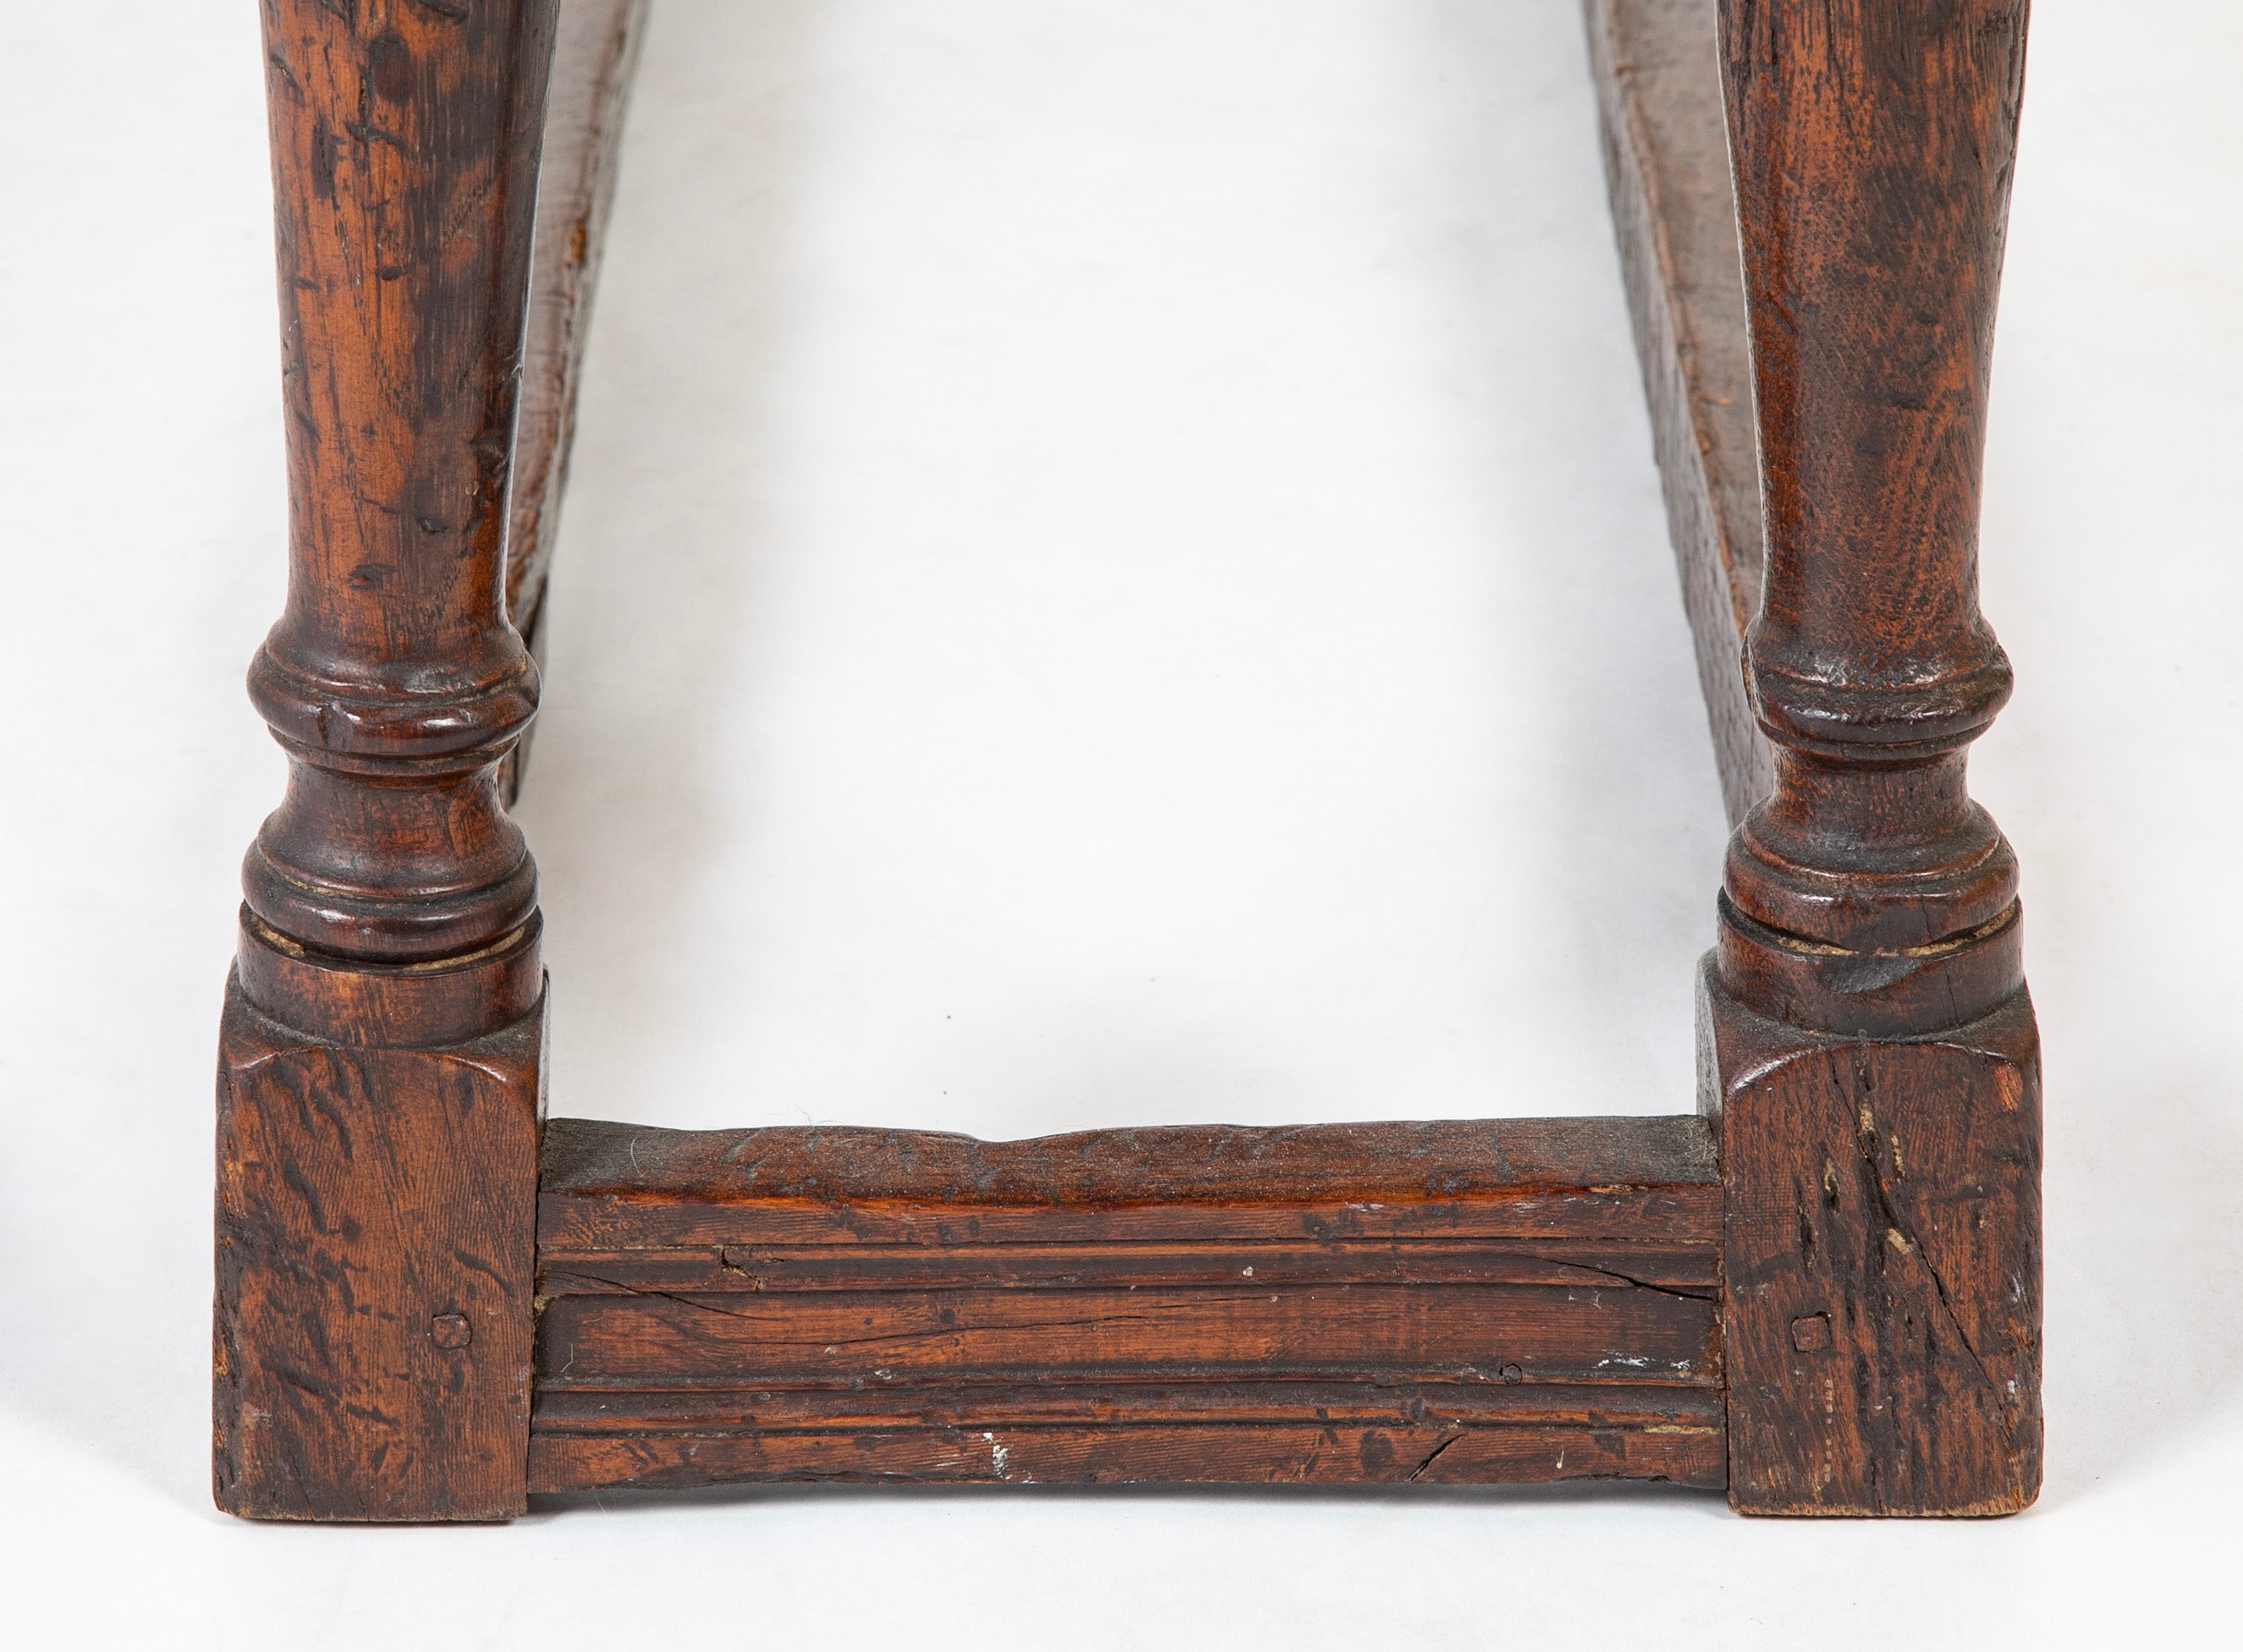 Jacobean Oak "Joint Stool" Bench with Pegged Construction